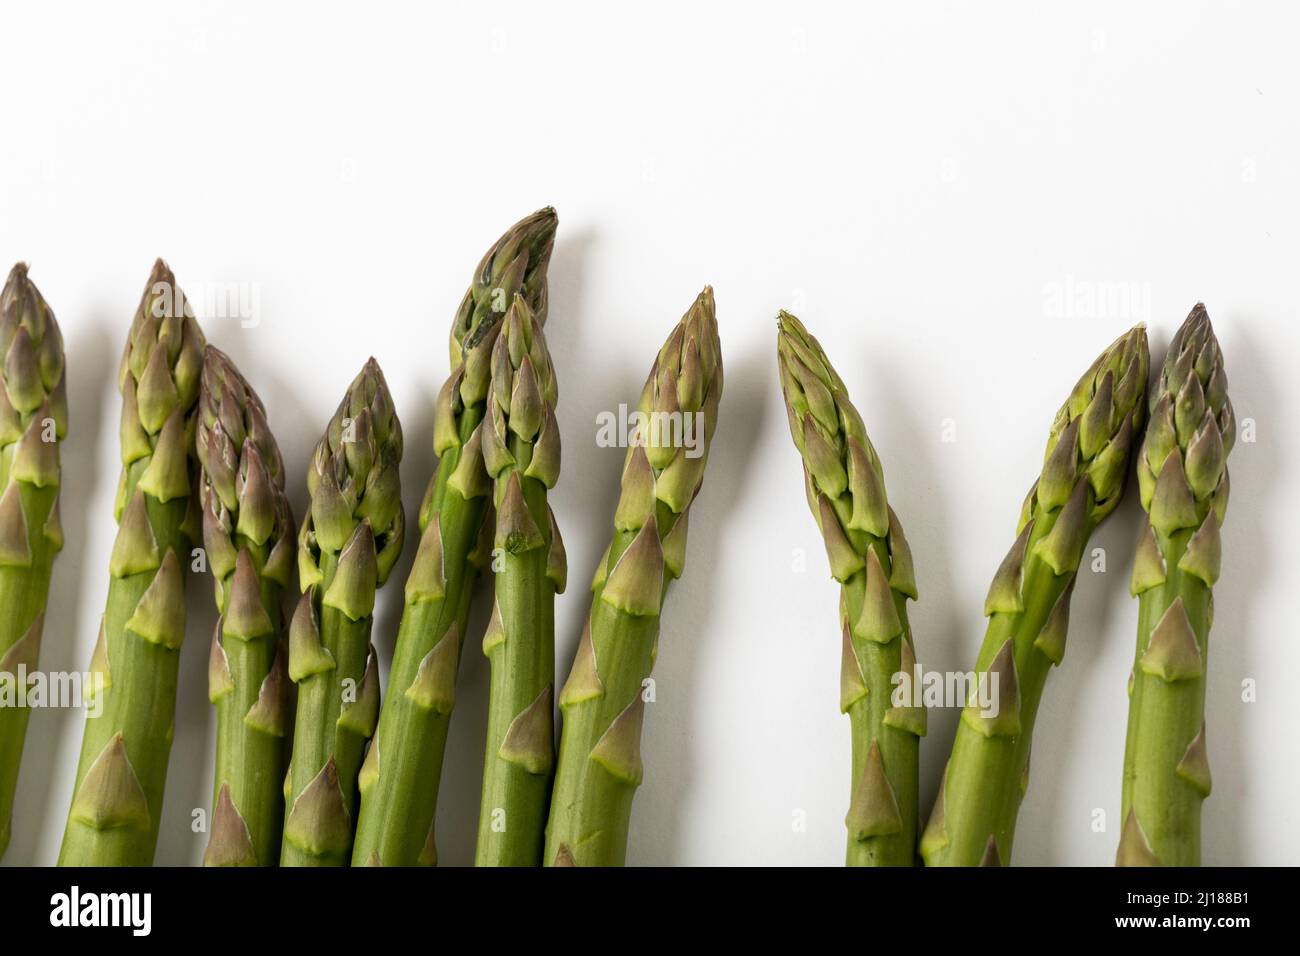 Overhead view of green raw asparagus against white background Stock Photo